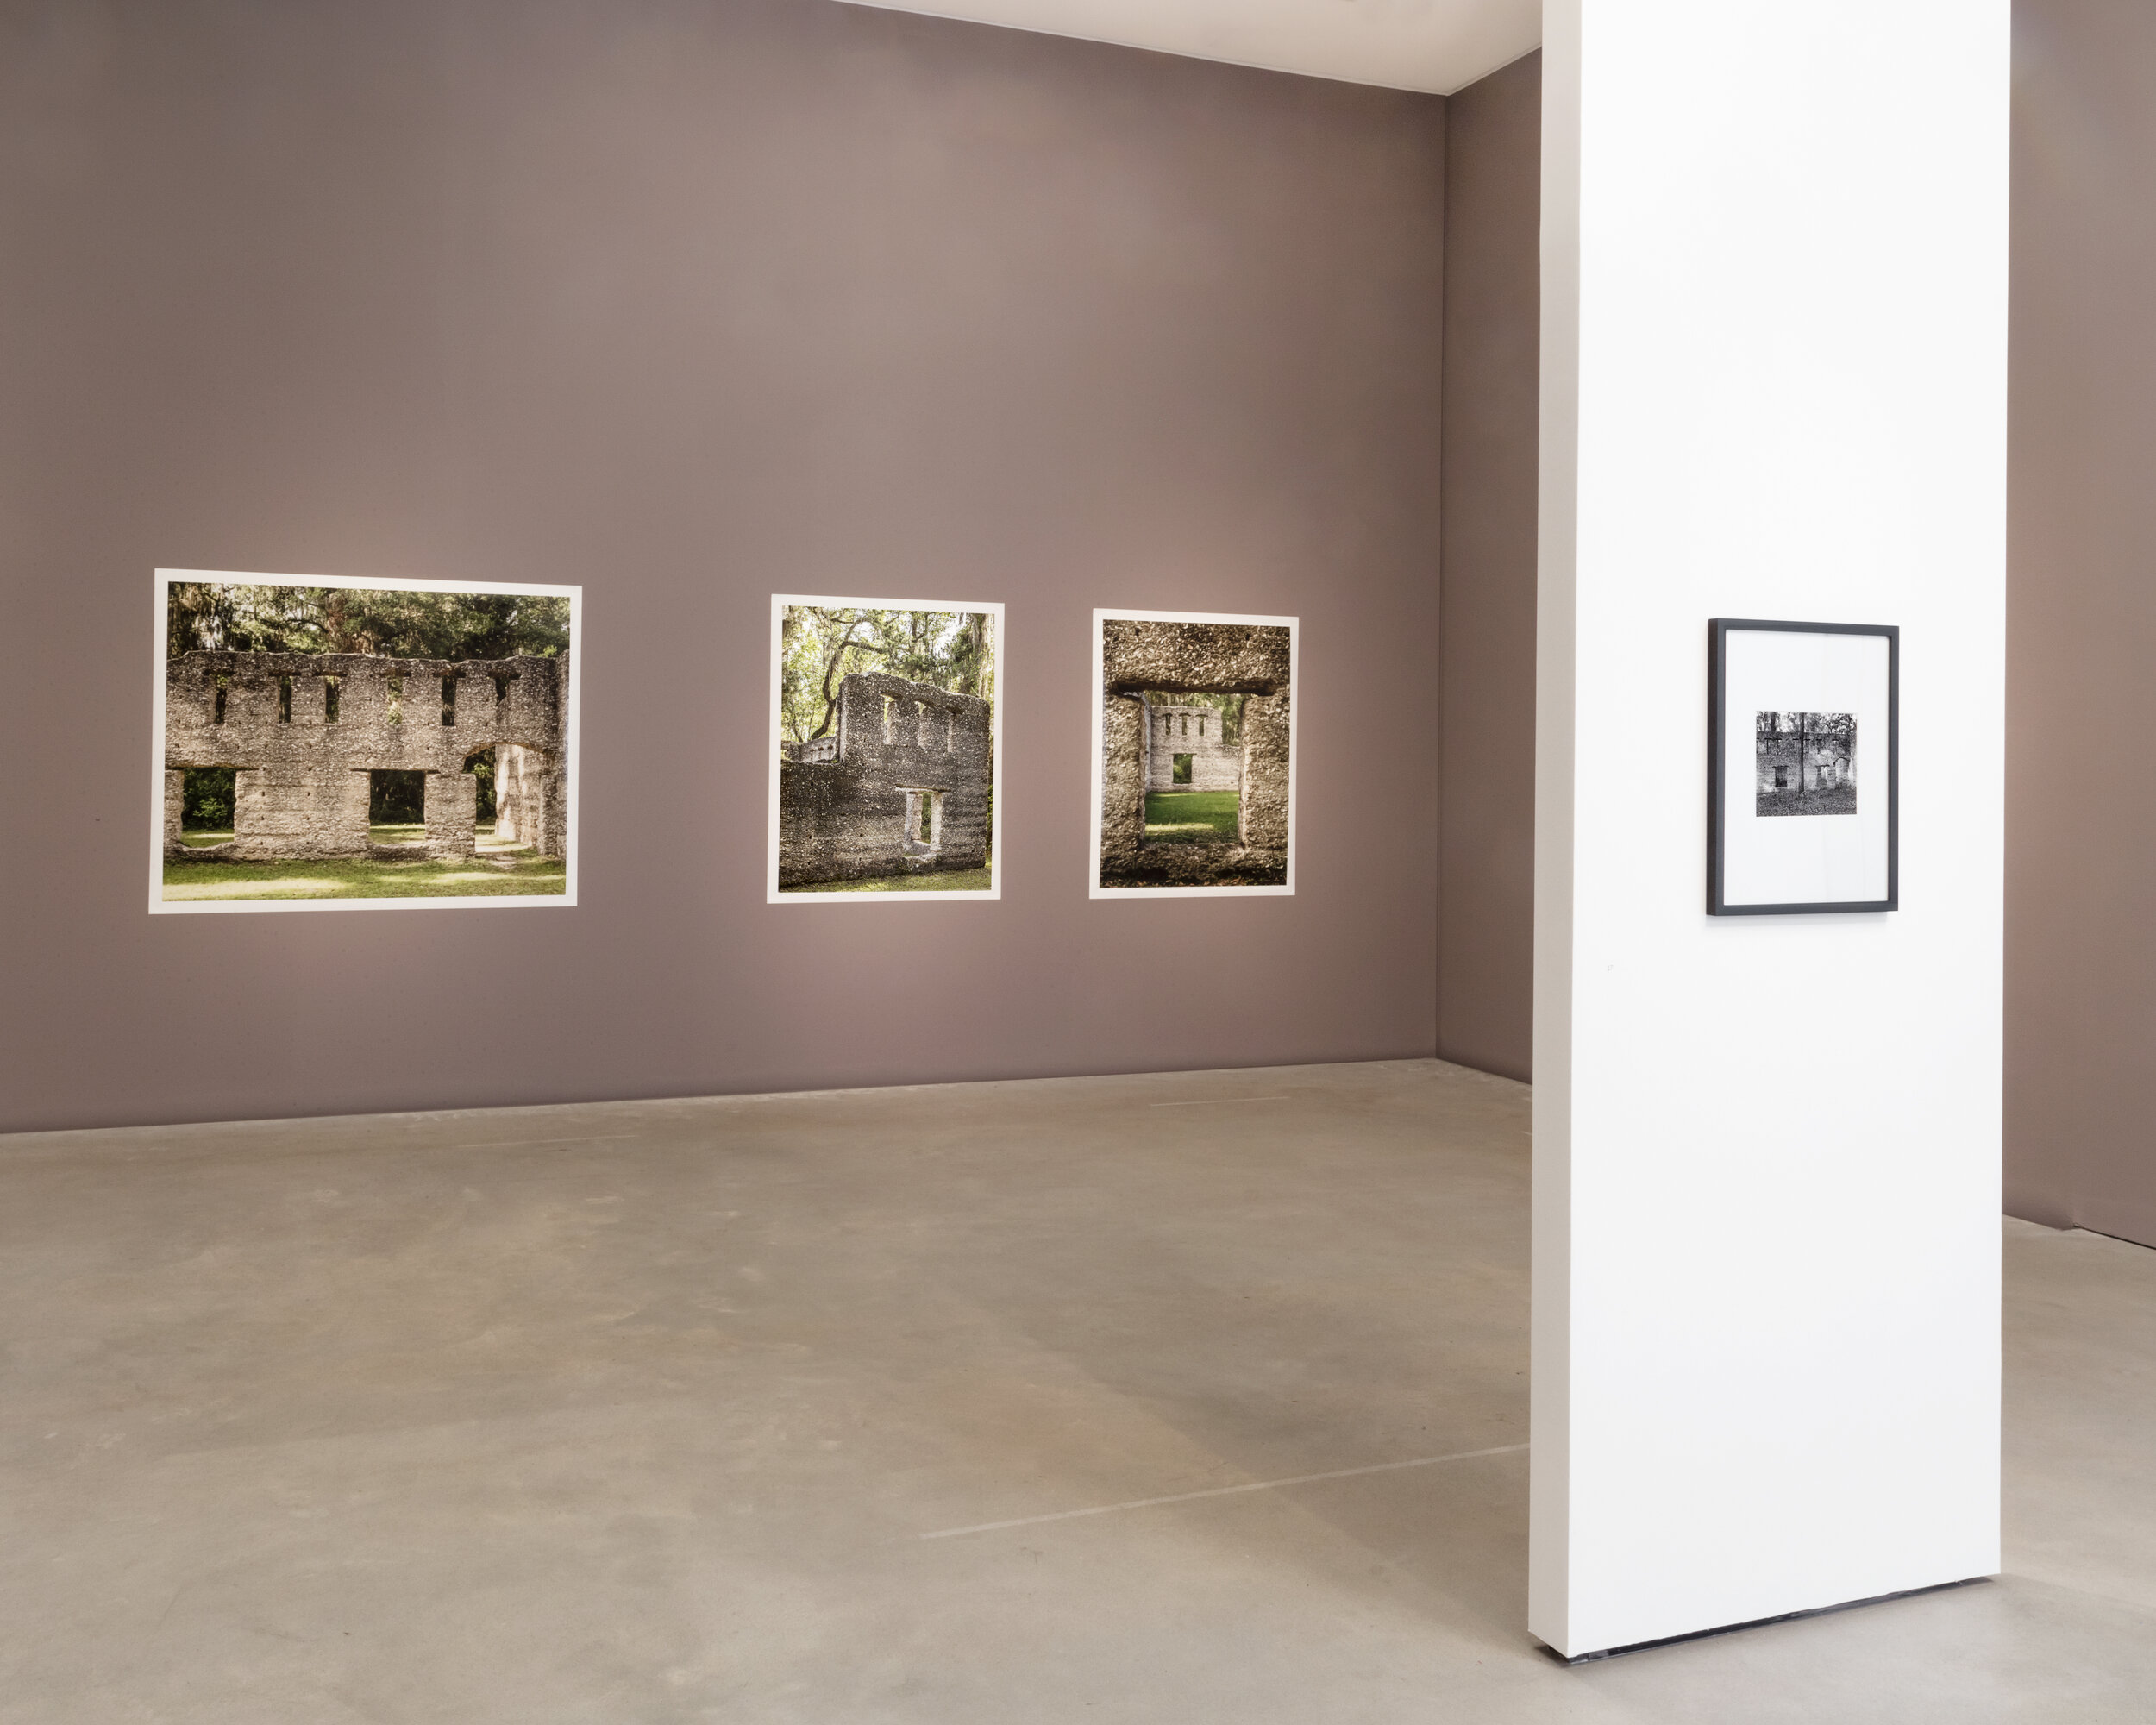   Installation view, Ruins of Tabby Construction, St Mary's, Georgia, in Walker Evans Revisited exhibition at the Biennale for Contemporary Photography, Kunsthalle Mannheim, 2020  